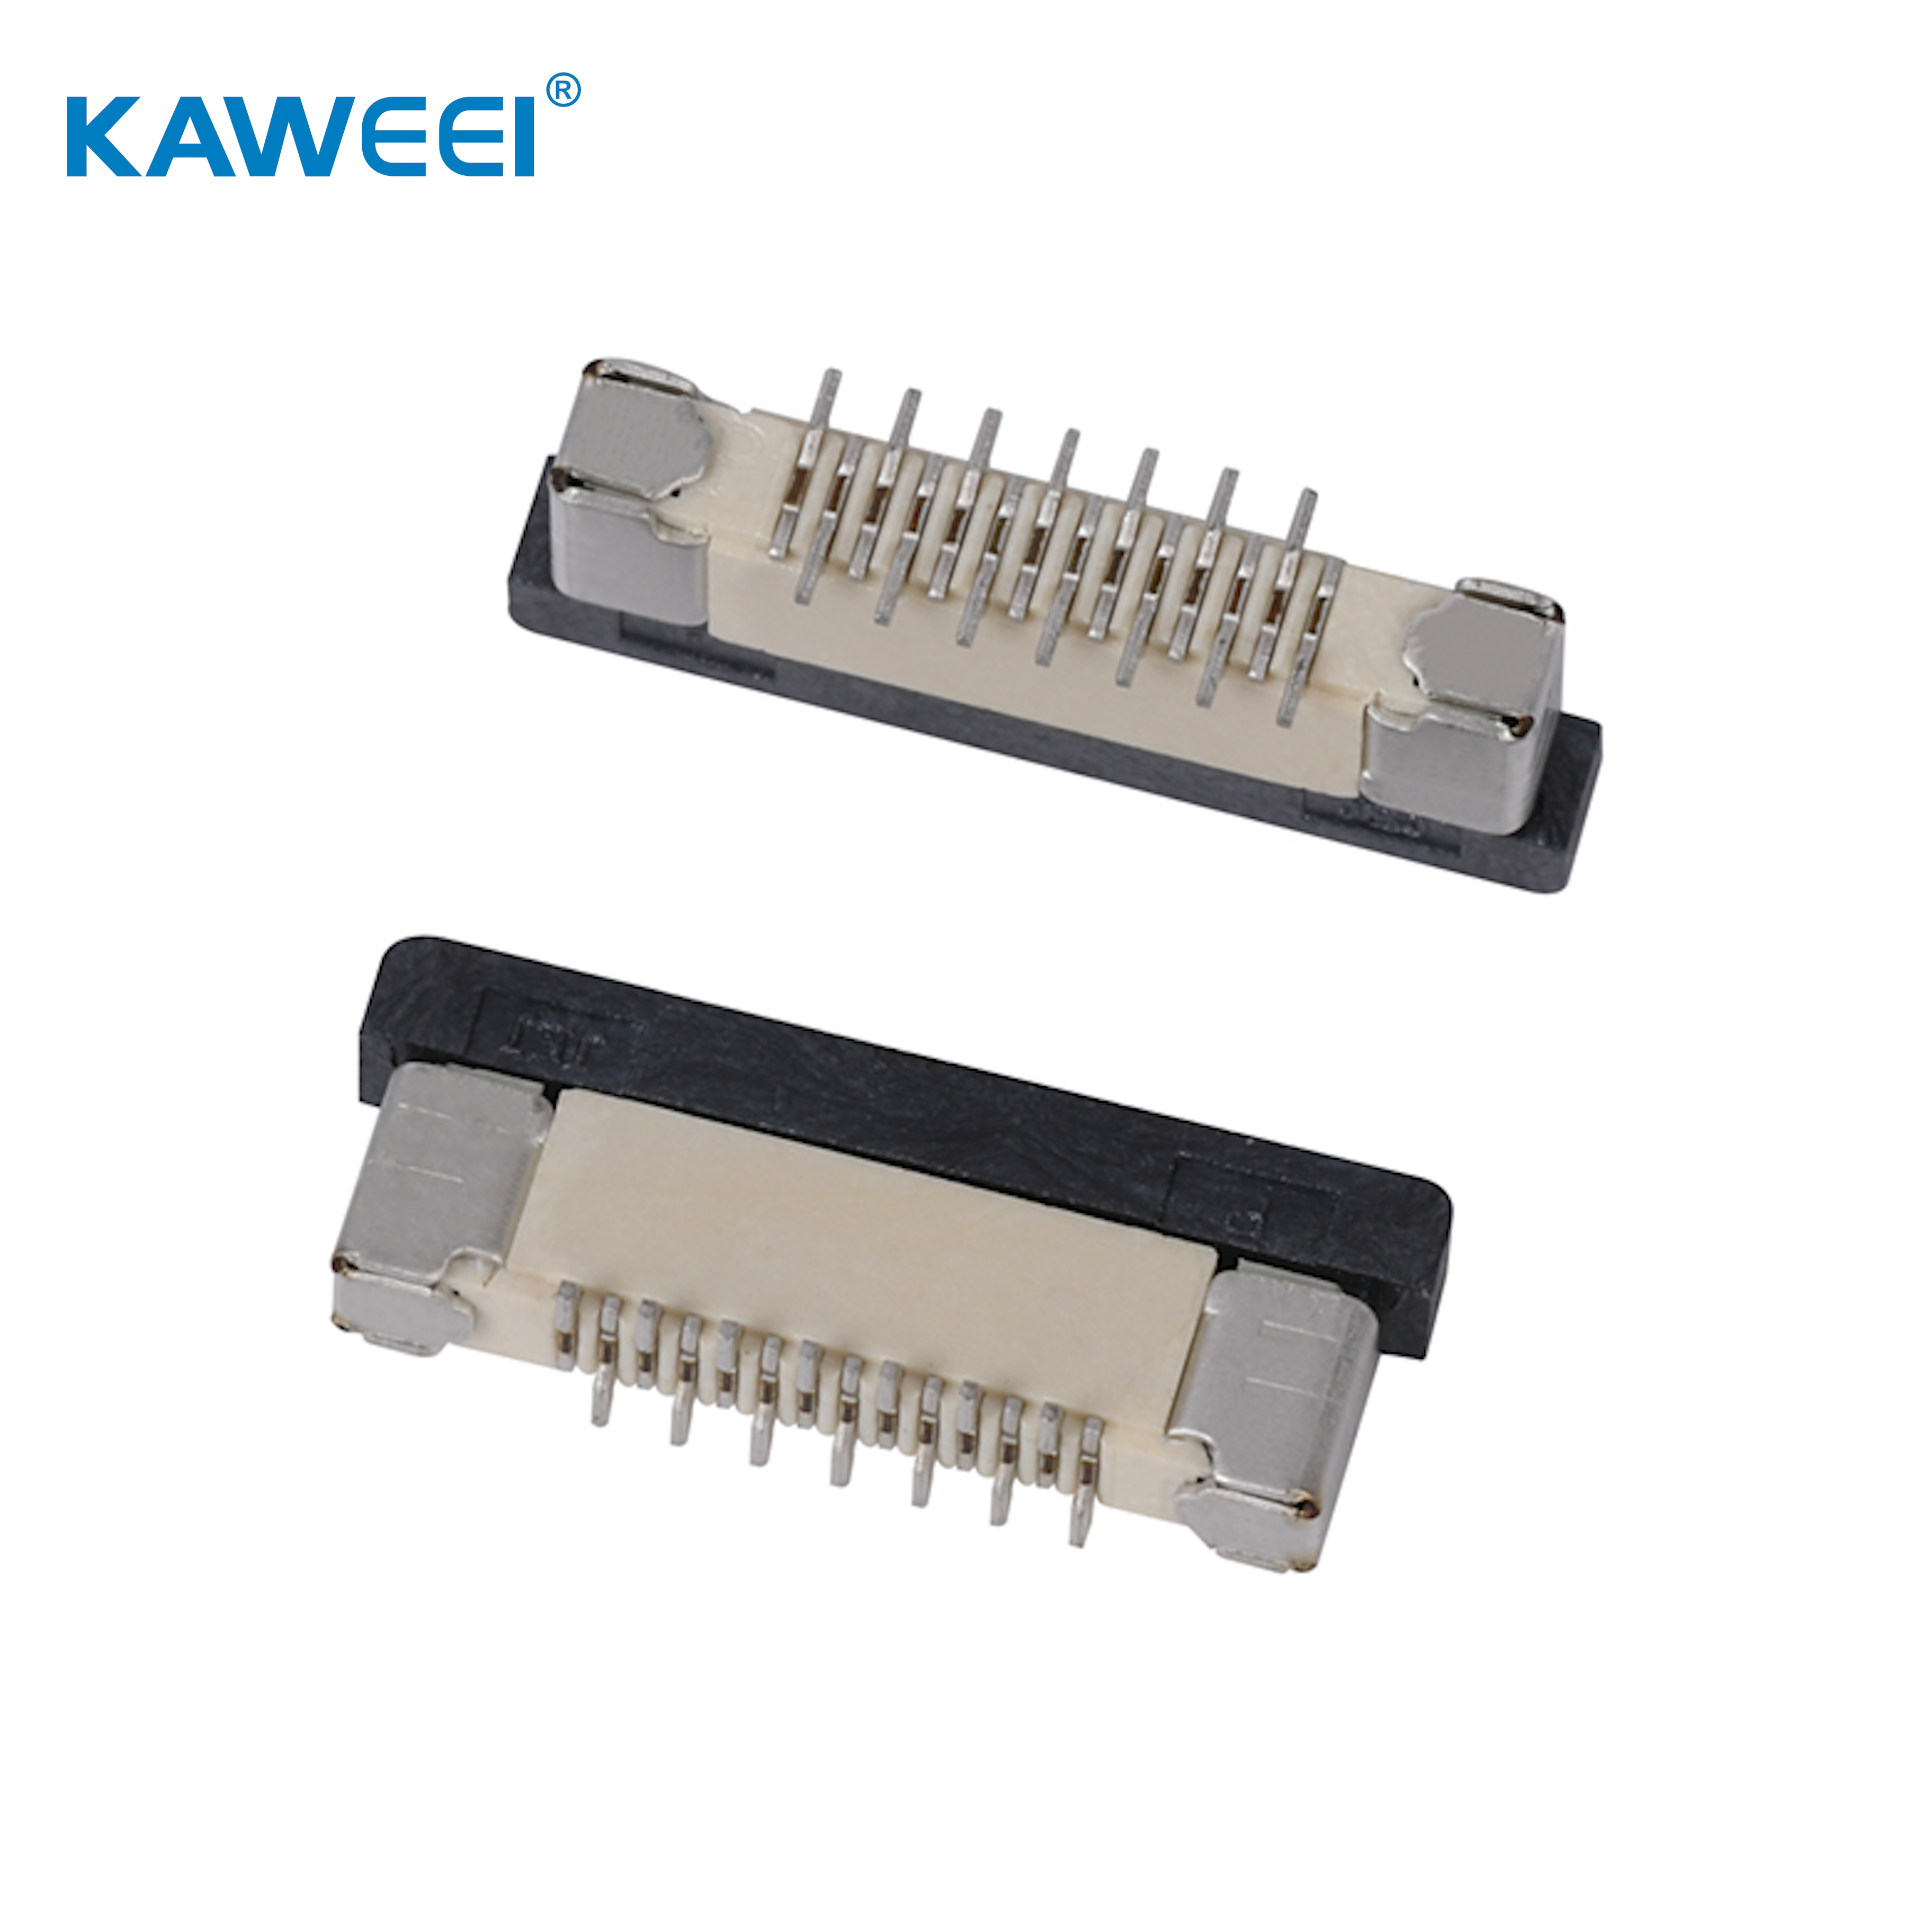 Do you need connector or connector with wire?